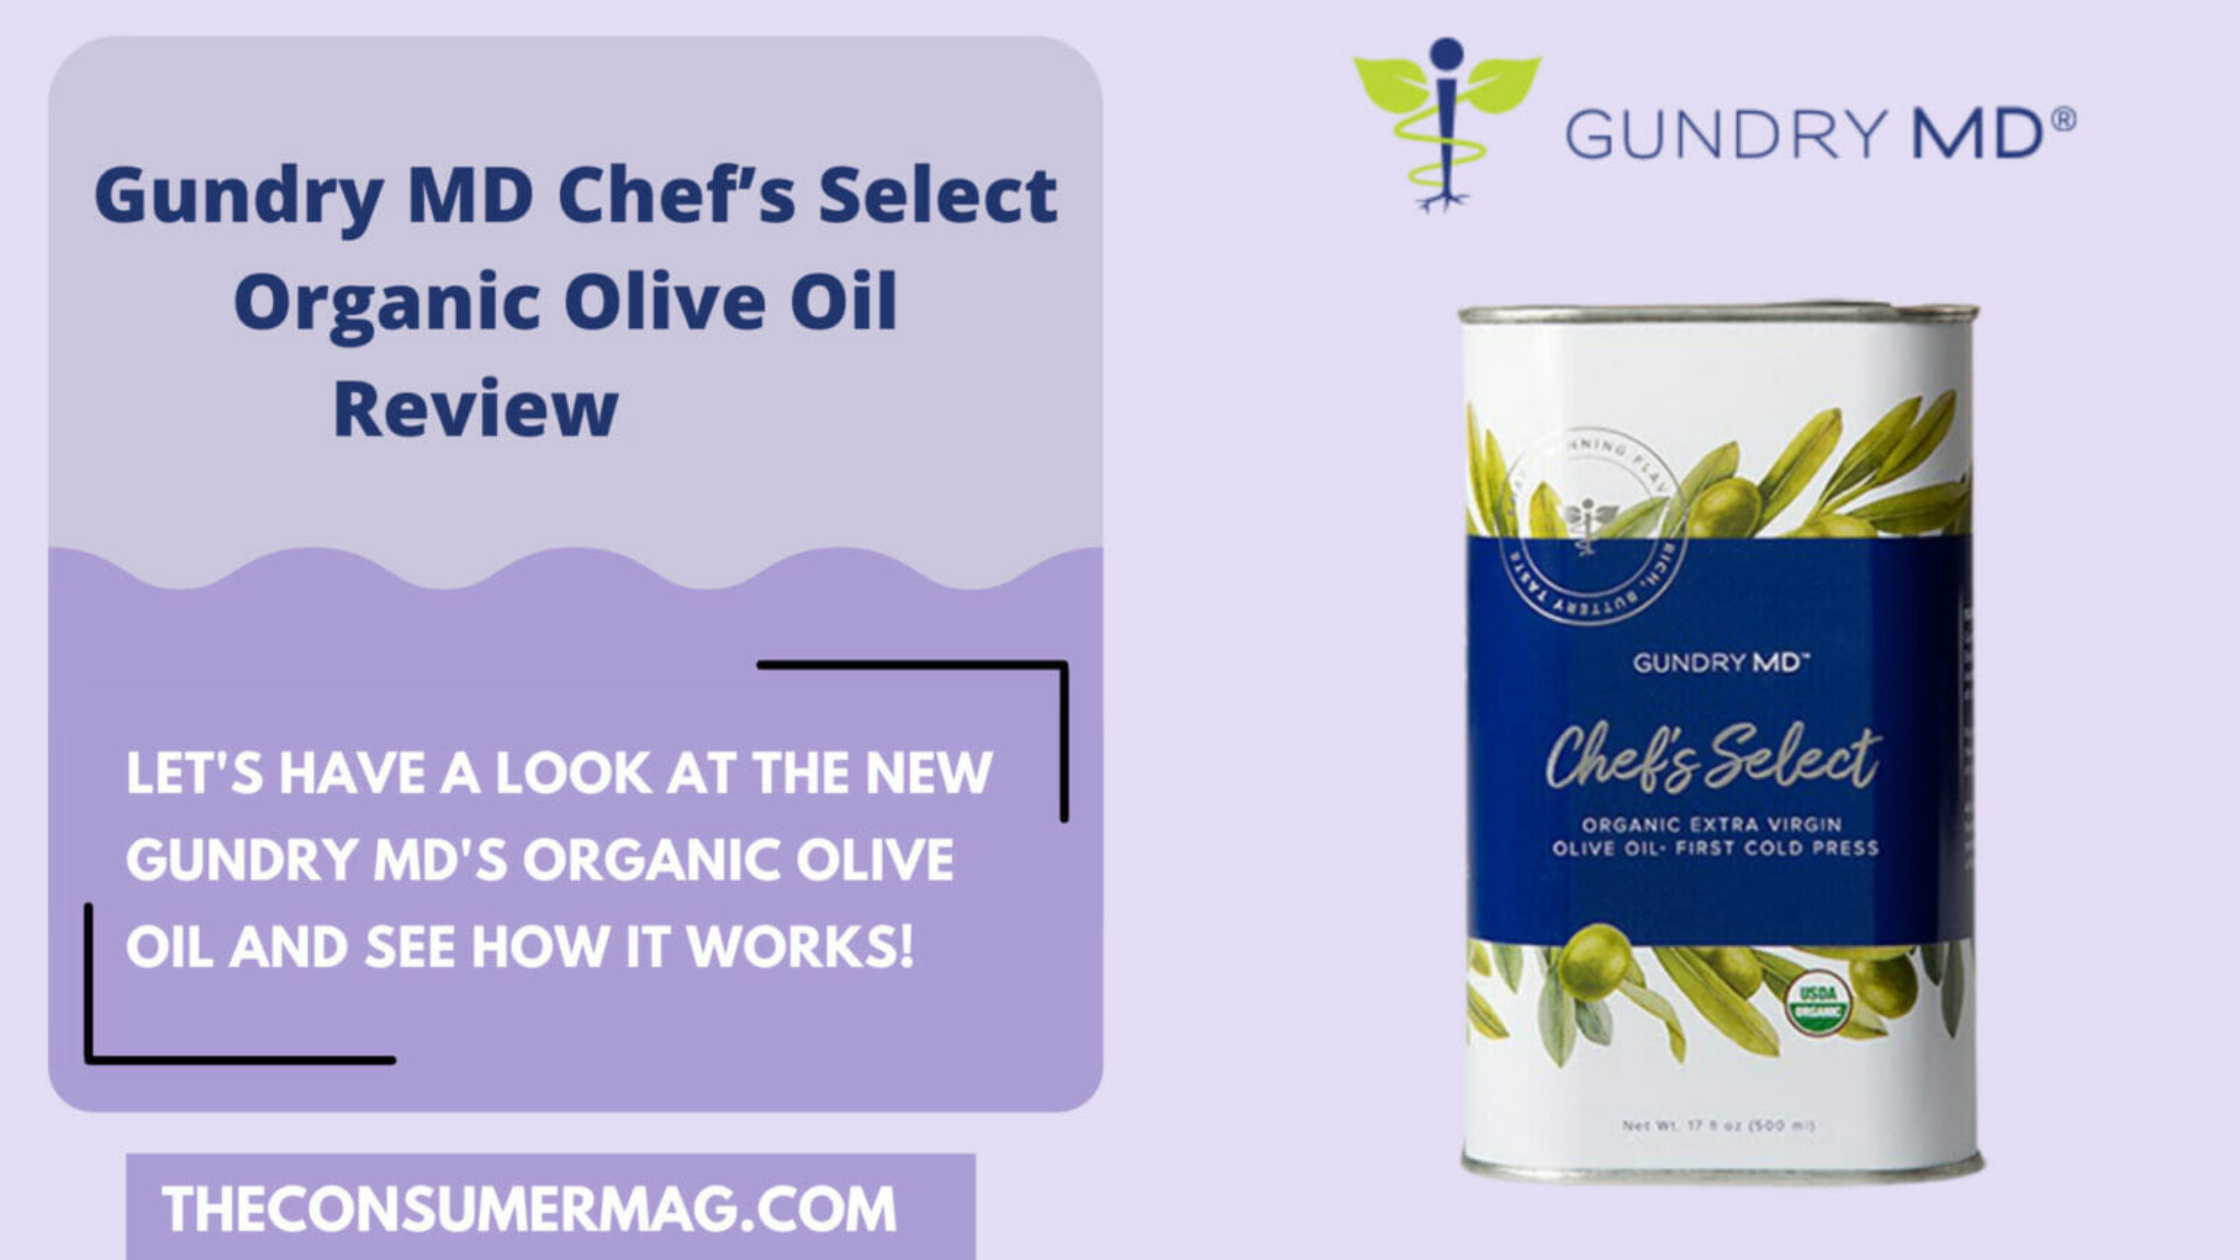 Chef’s Select Organic Olive Oil featured image